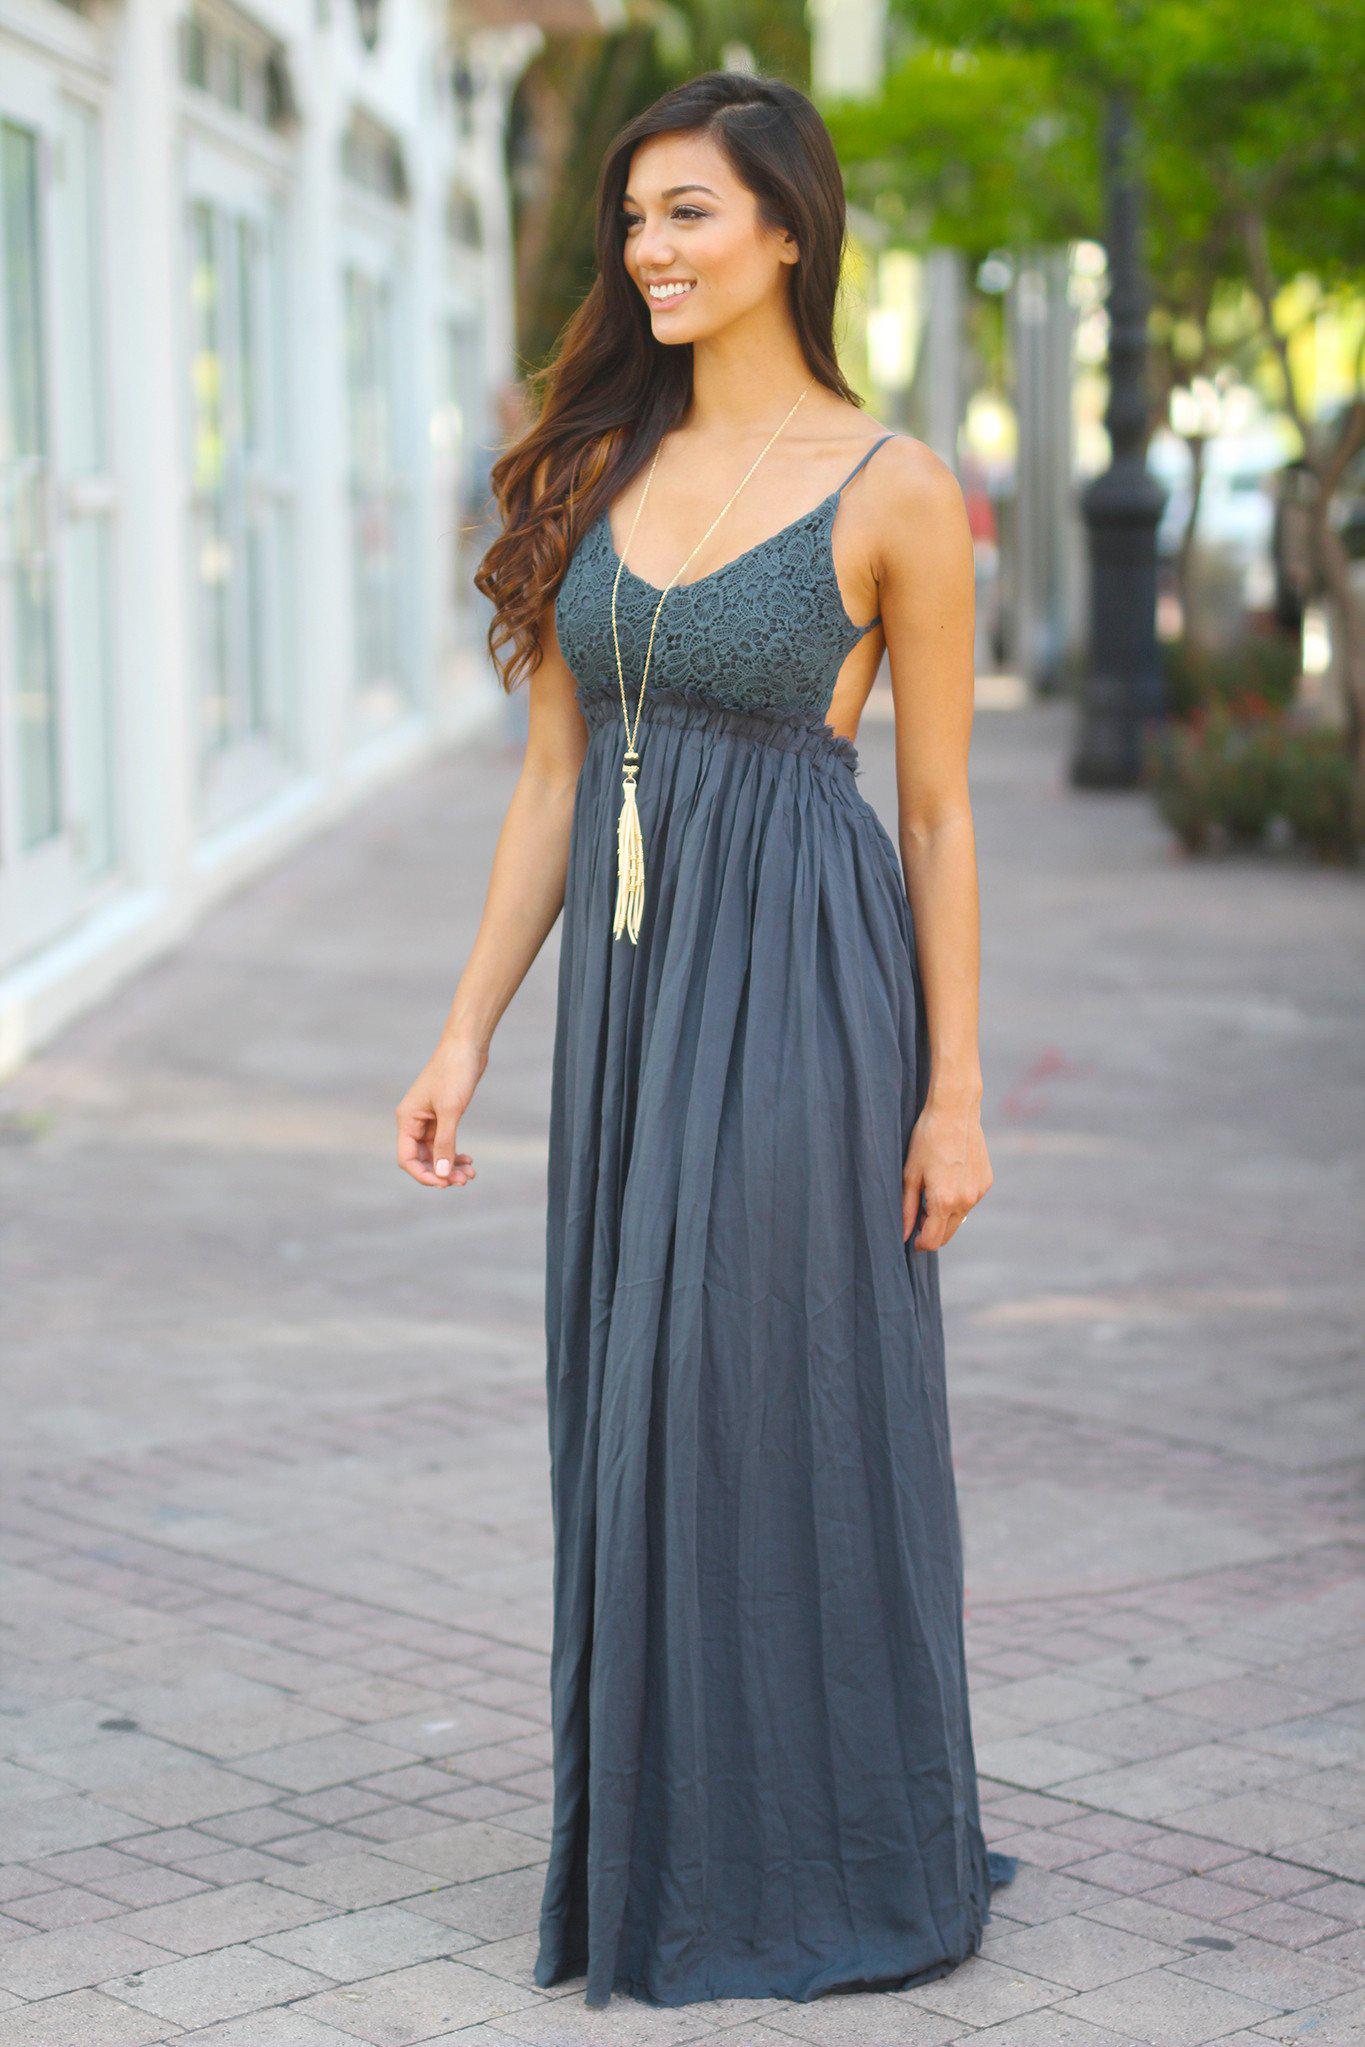 crochet top maxi dress with open back